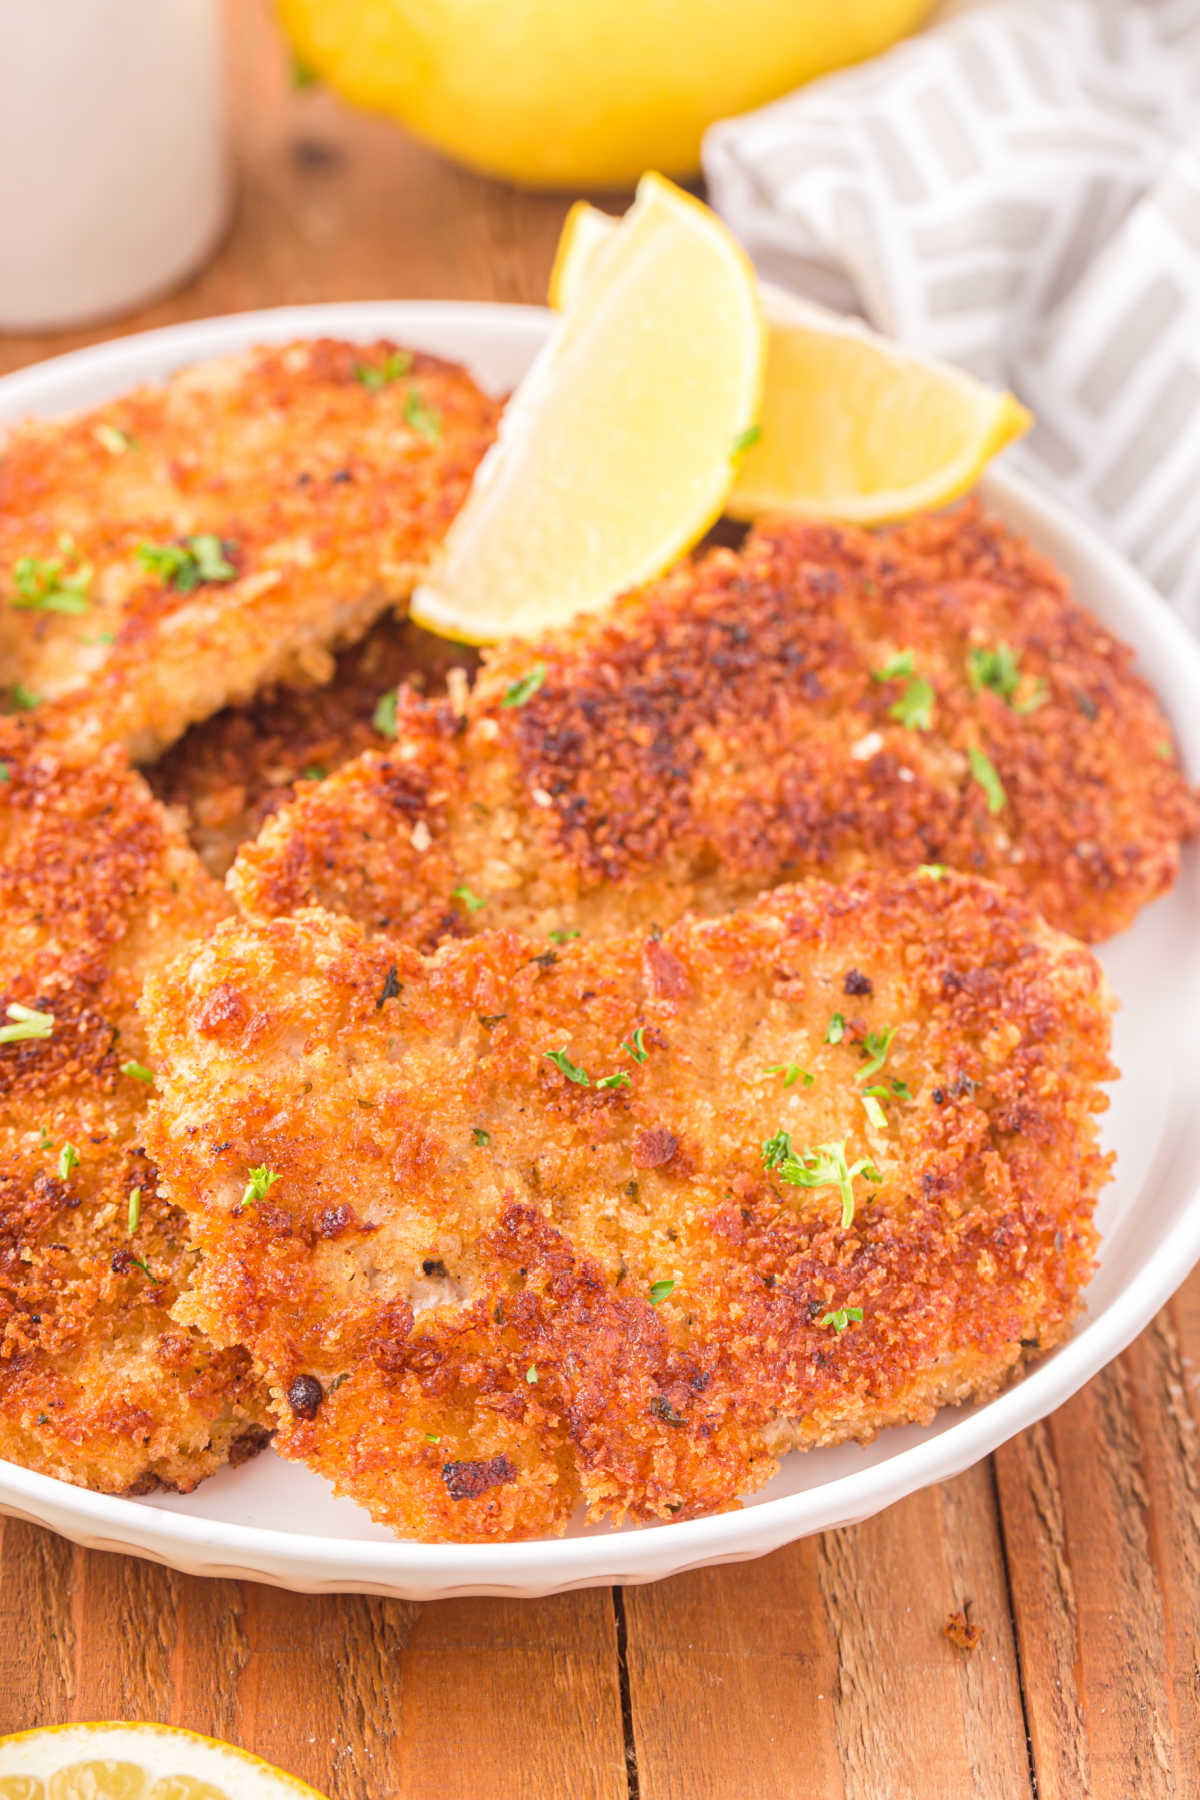 Pork schnitzel on a plate with lemon wedges.